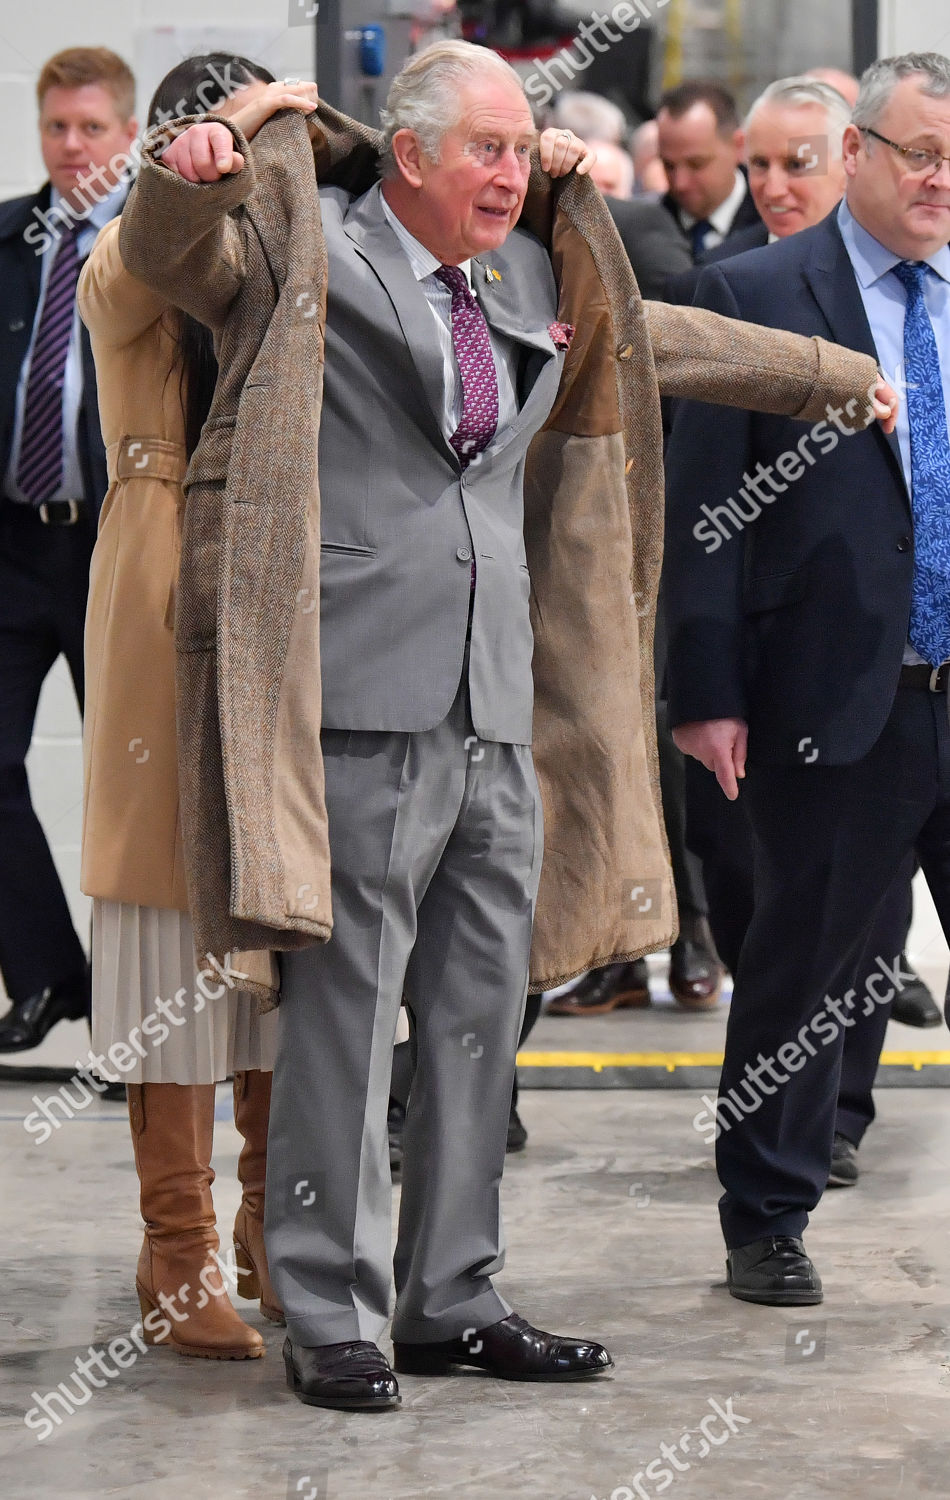 prince-charles-visit-to-south-wales-uk-shutterstock-editorial-10563131v.jpg